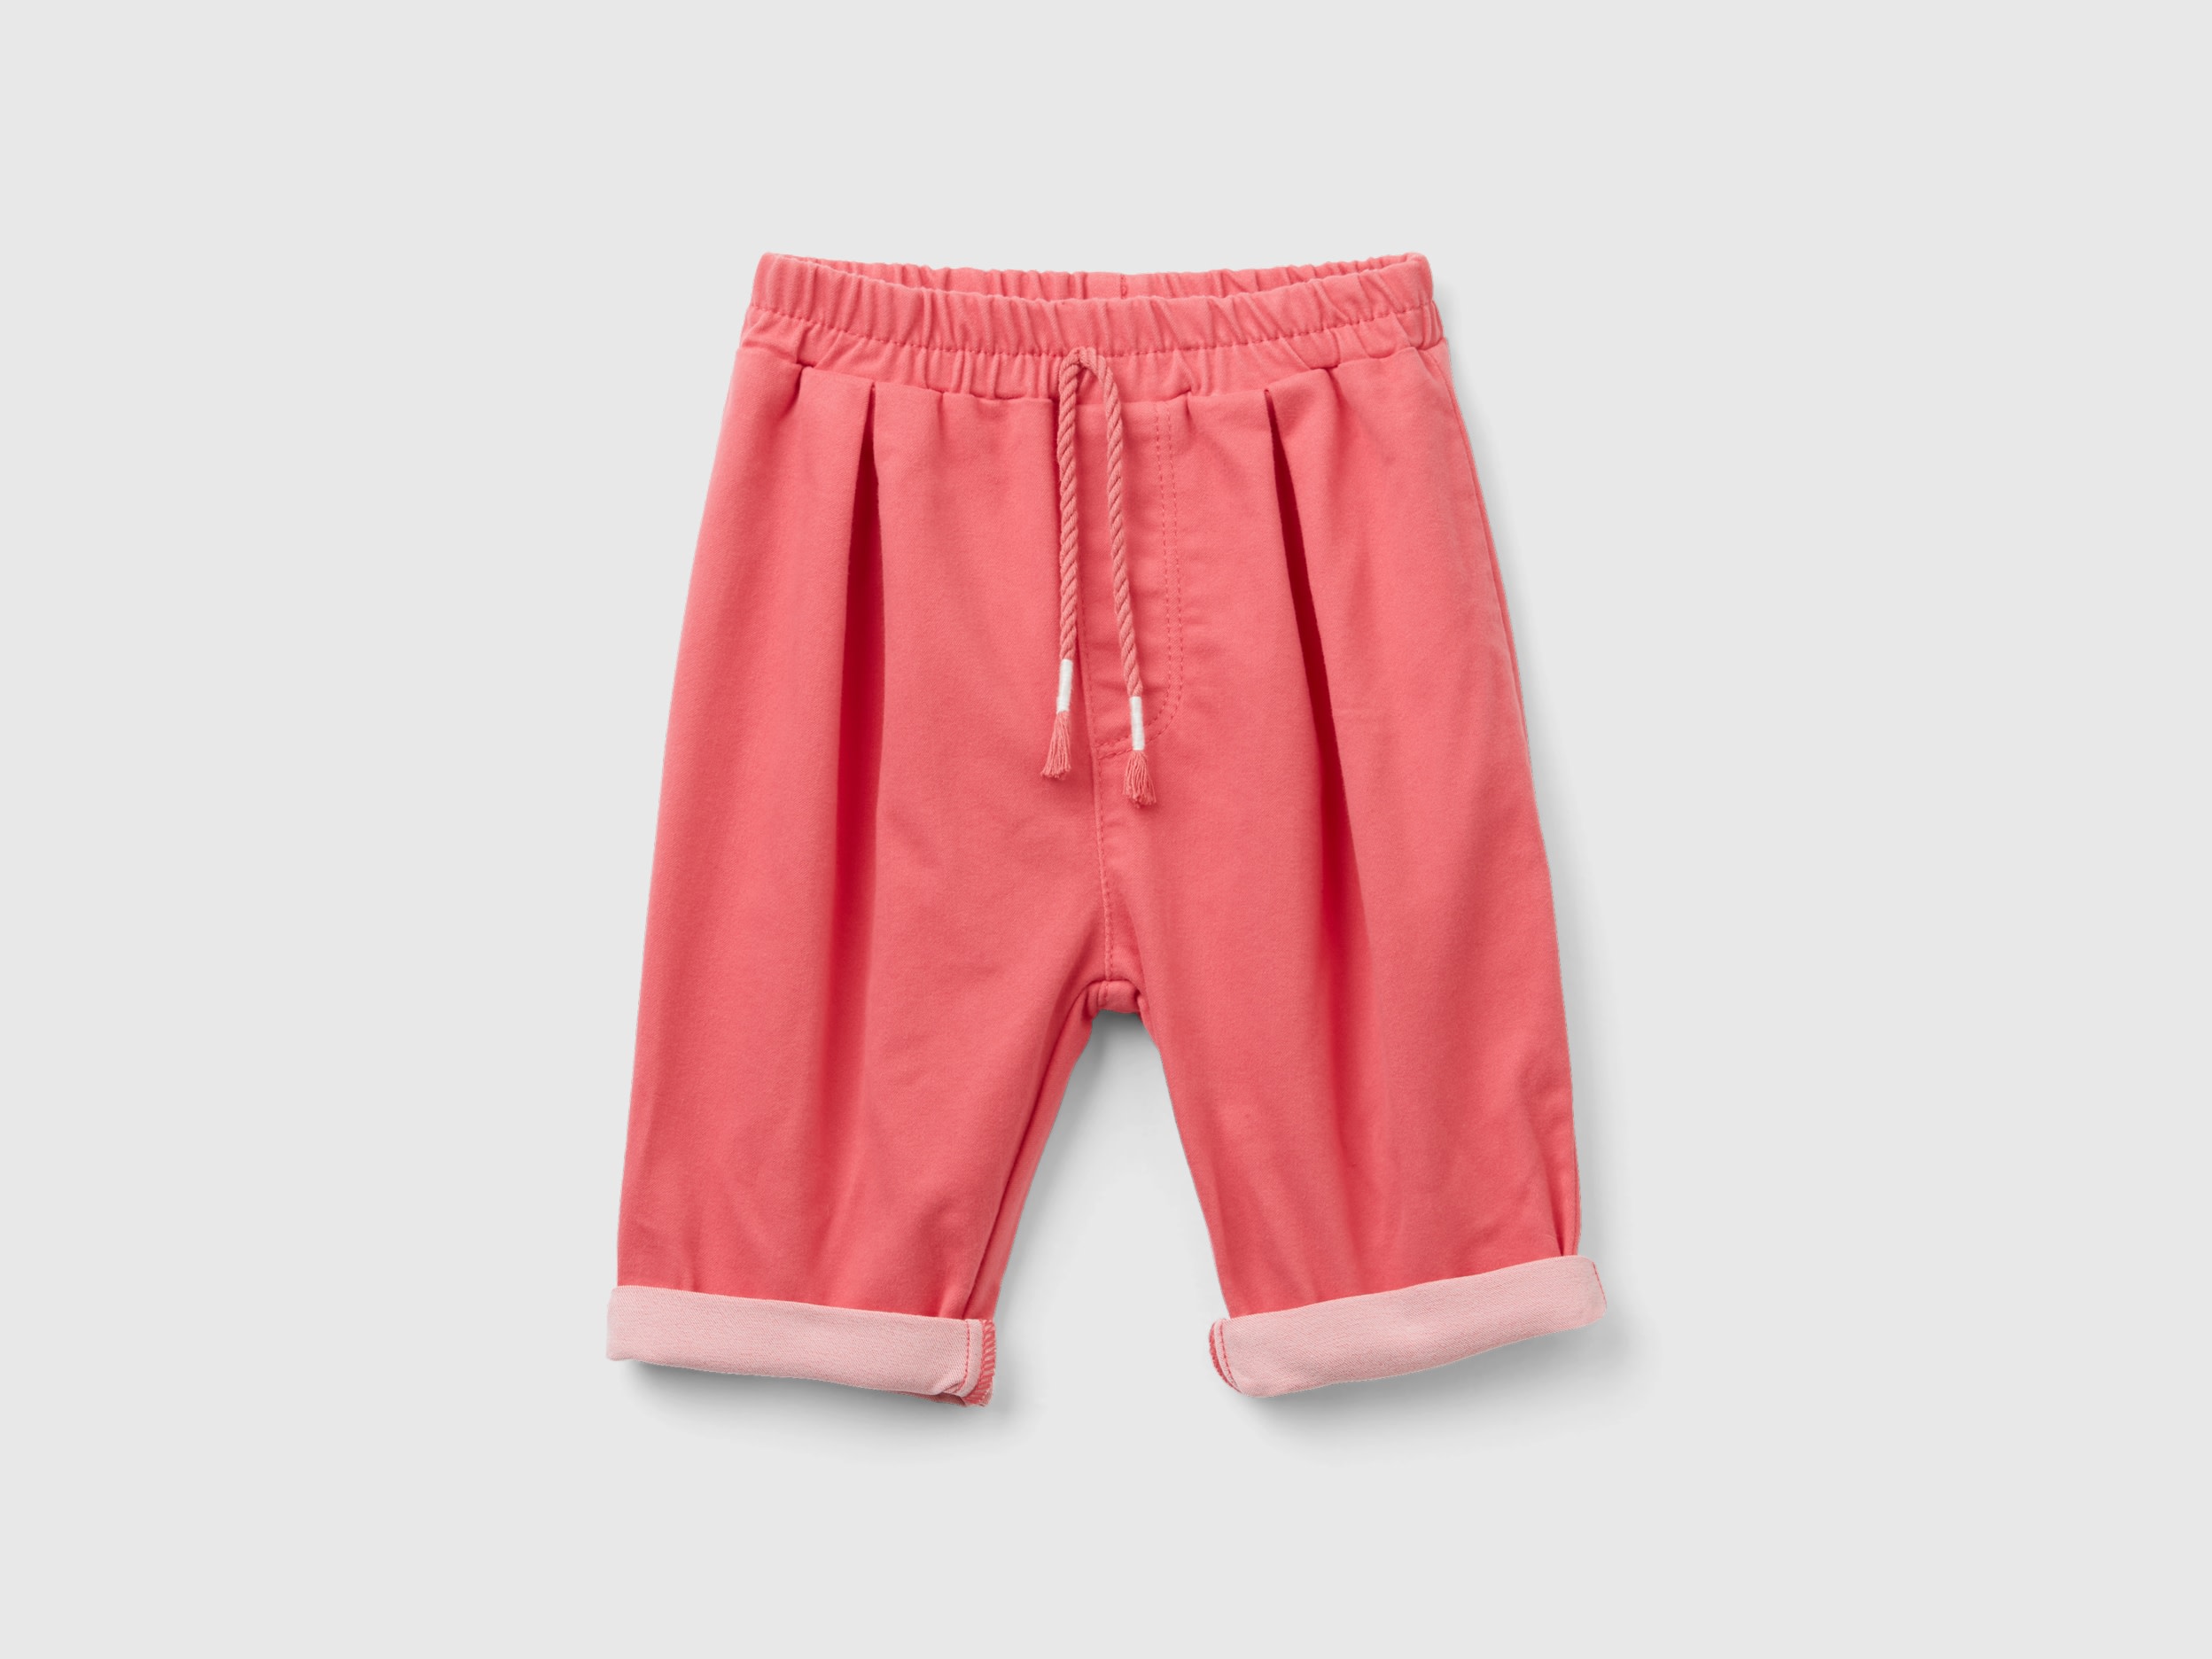 Benetton, Super Stretch Trousers With Drawstring, size 12-18, Salmon, Kids